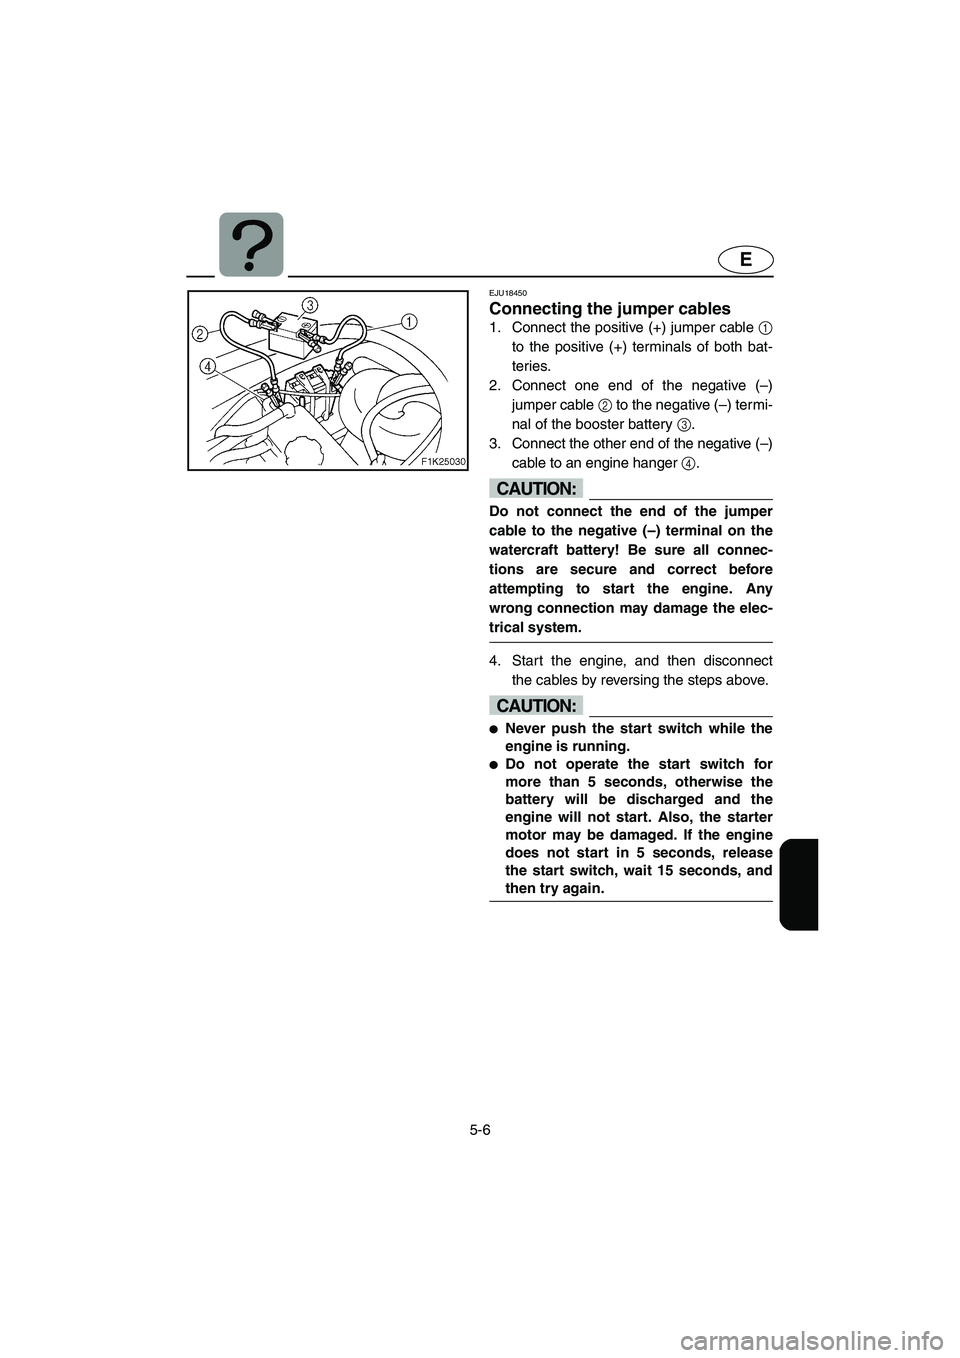 YAMAHA VX CRUISER 2005  Owners Manual 5-6
E
EJU18450 
Connecting the jumper cables 
1. Connect the positive (+) jumper cable 1
to the positive (+) terminals of both bat-
teries. 
2. Connect one end of the negative (–)
jumper cable 2 to 